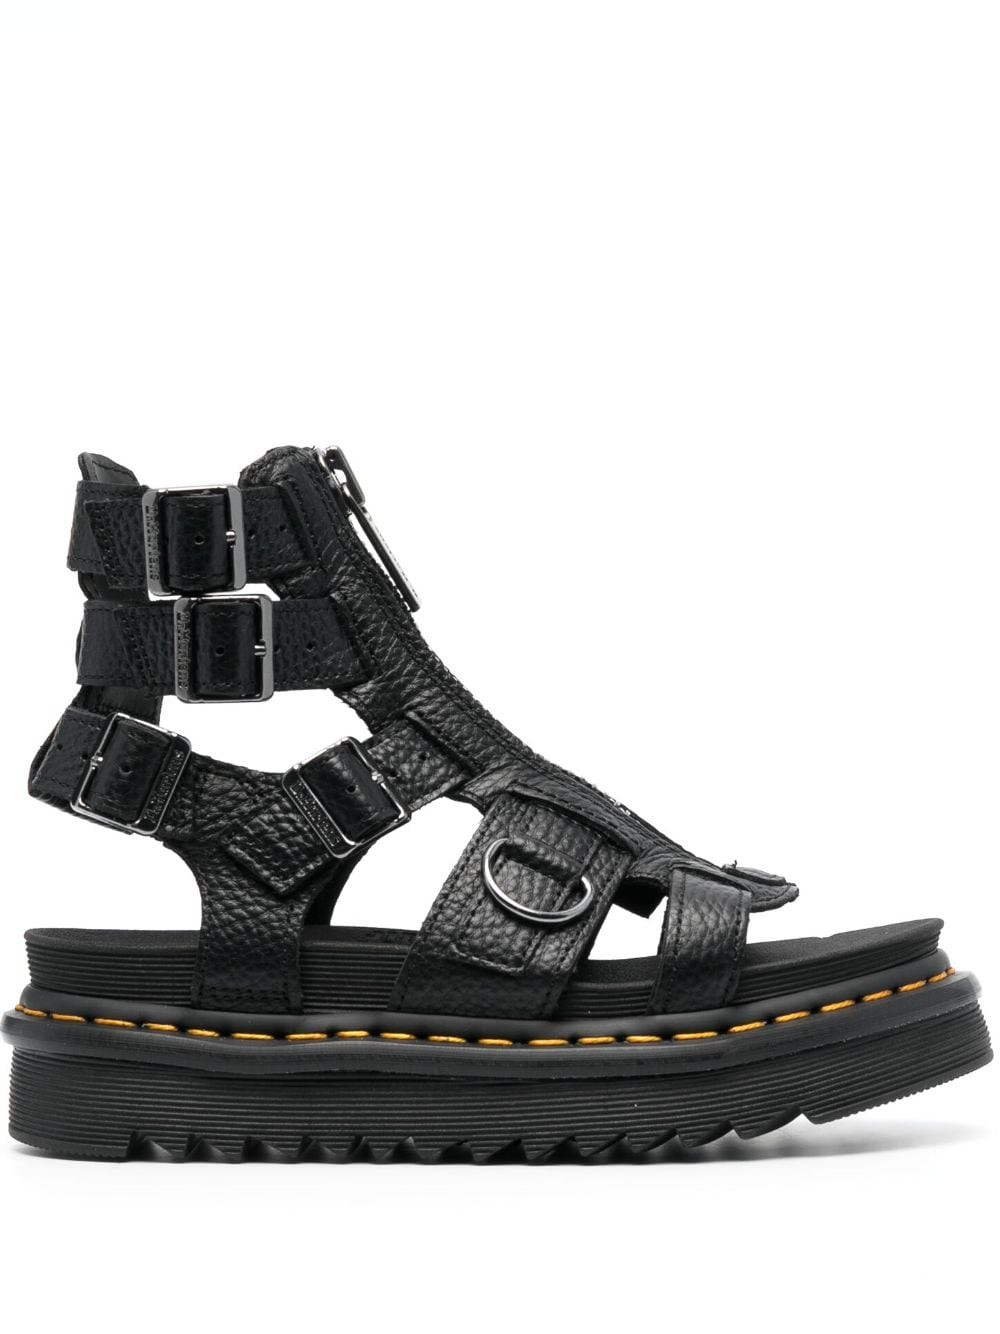 Dr. Martens Olson leather sandals